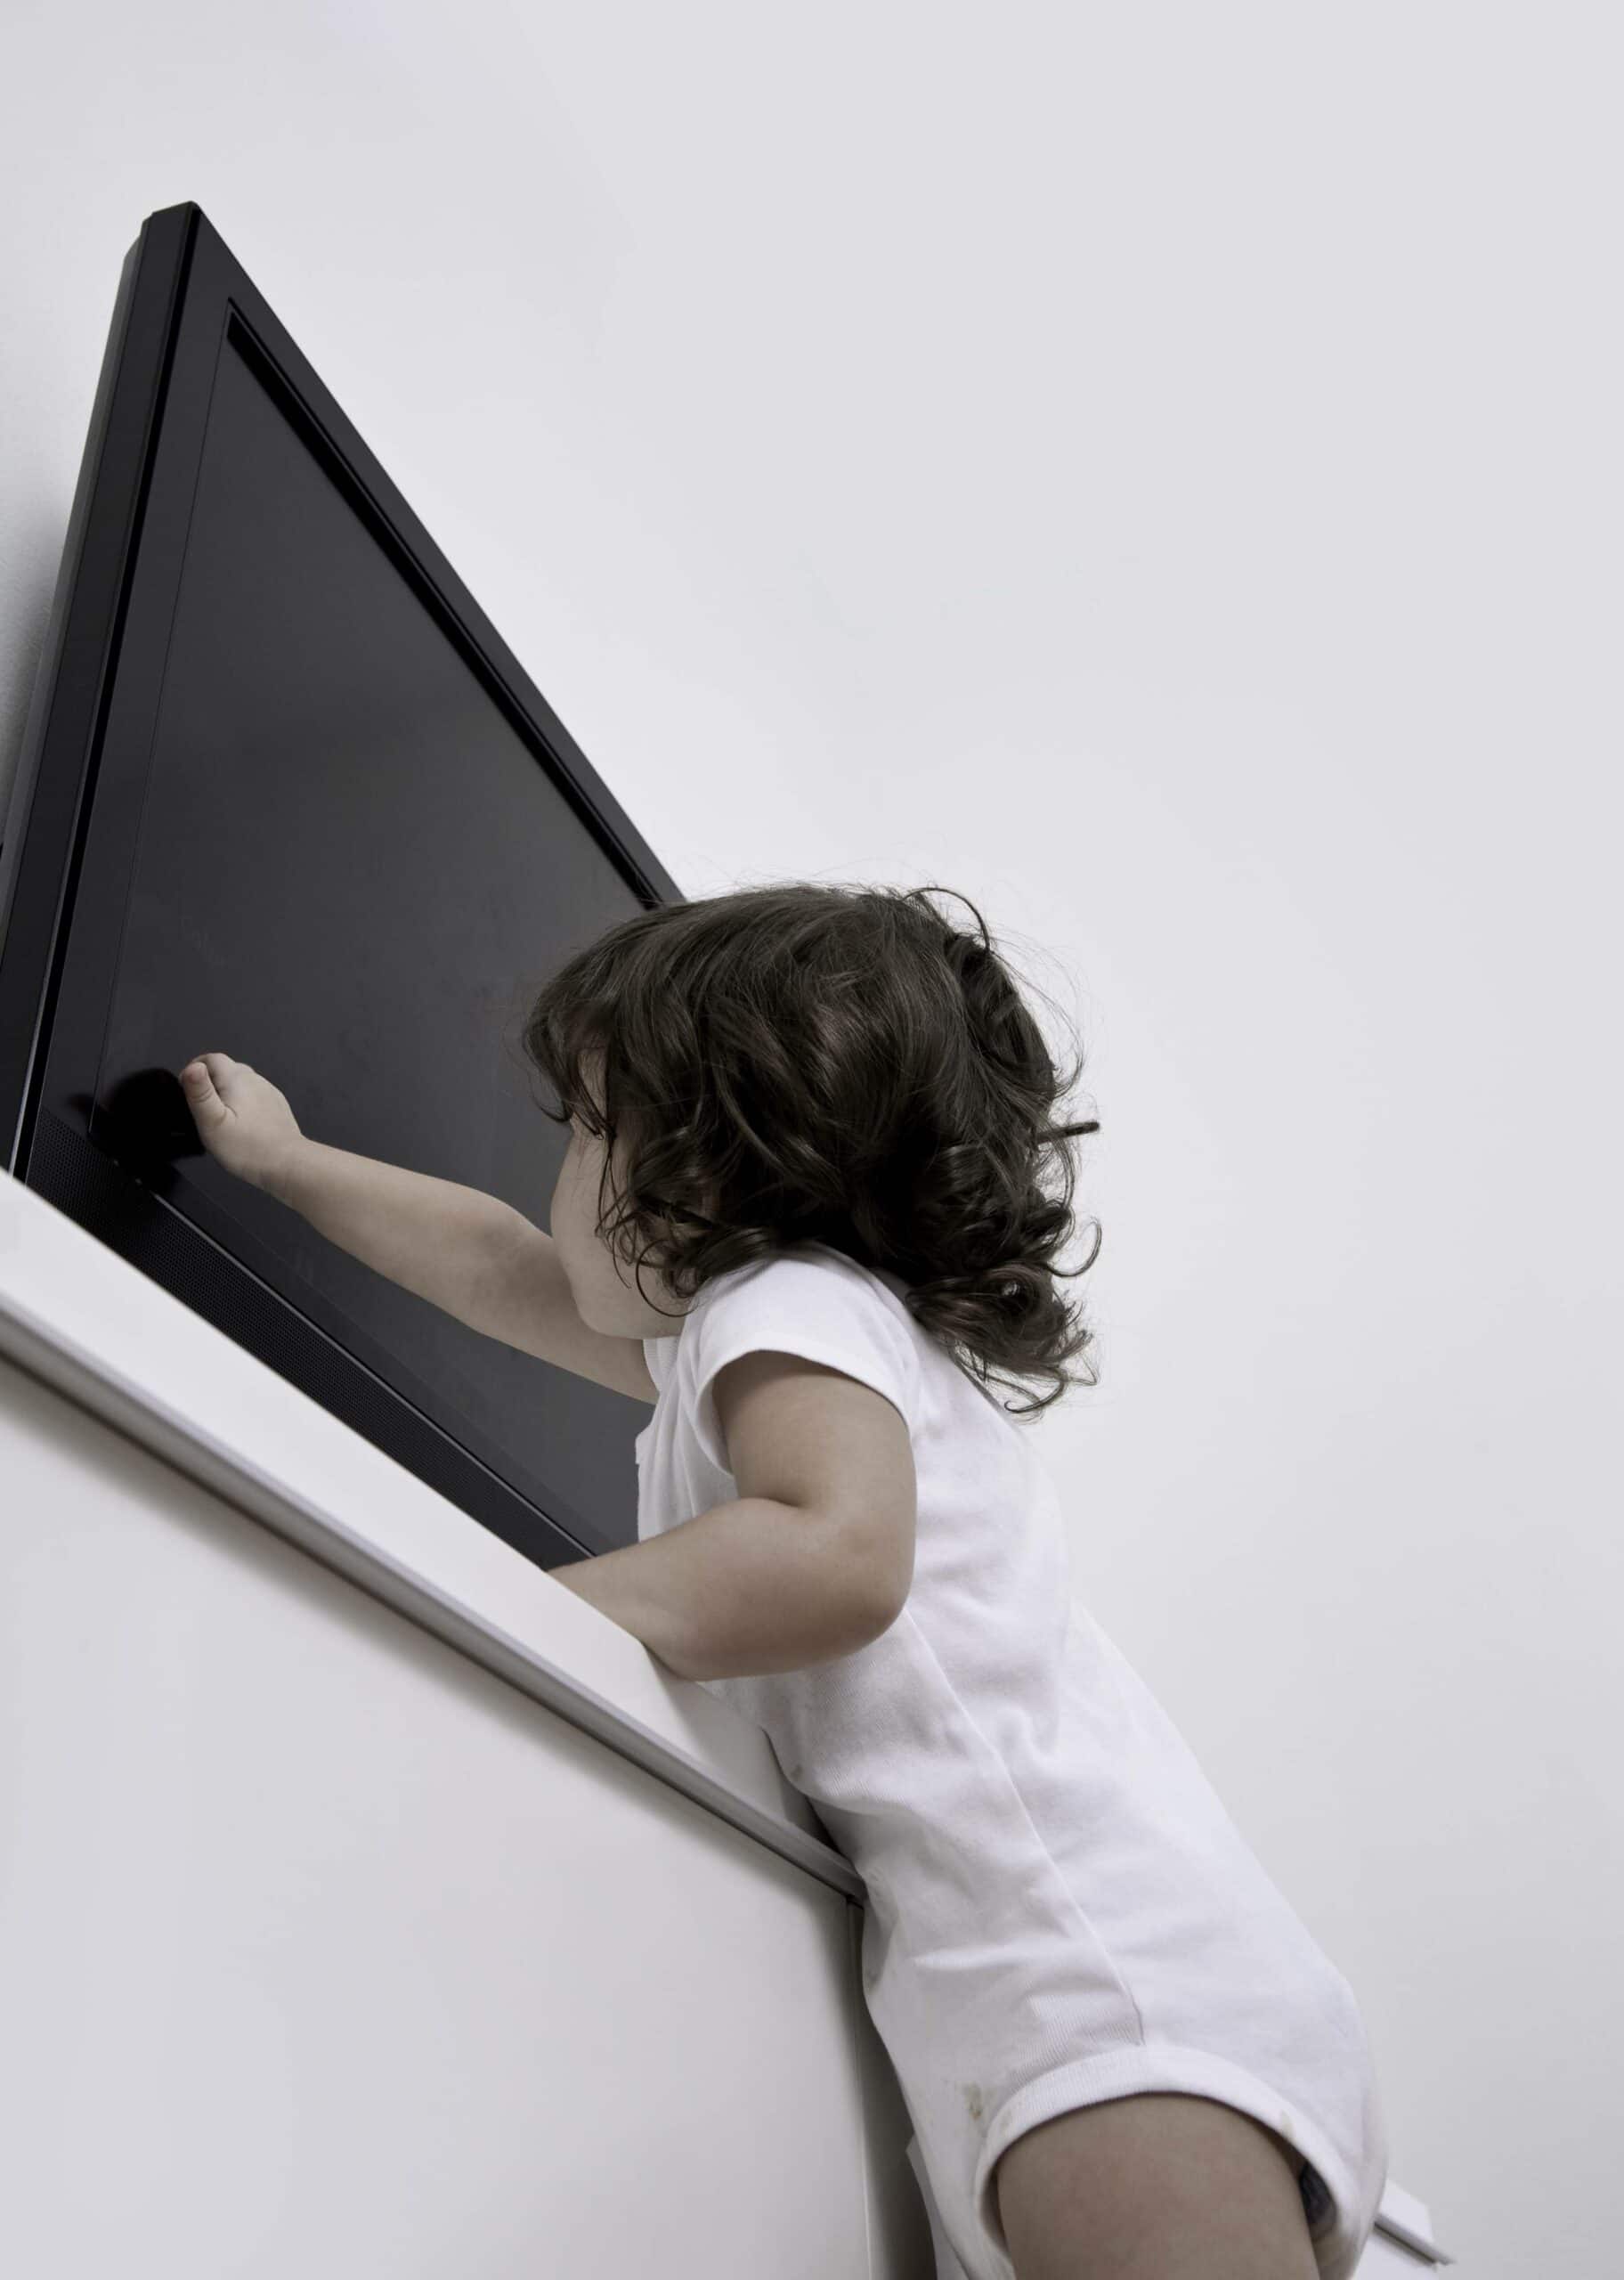 Little girl reaching up to touch the TV